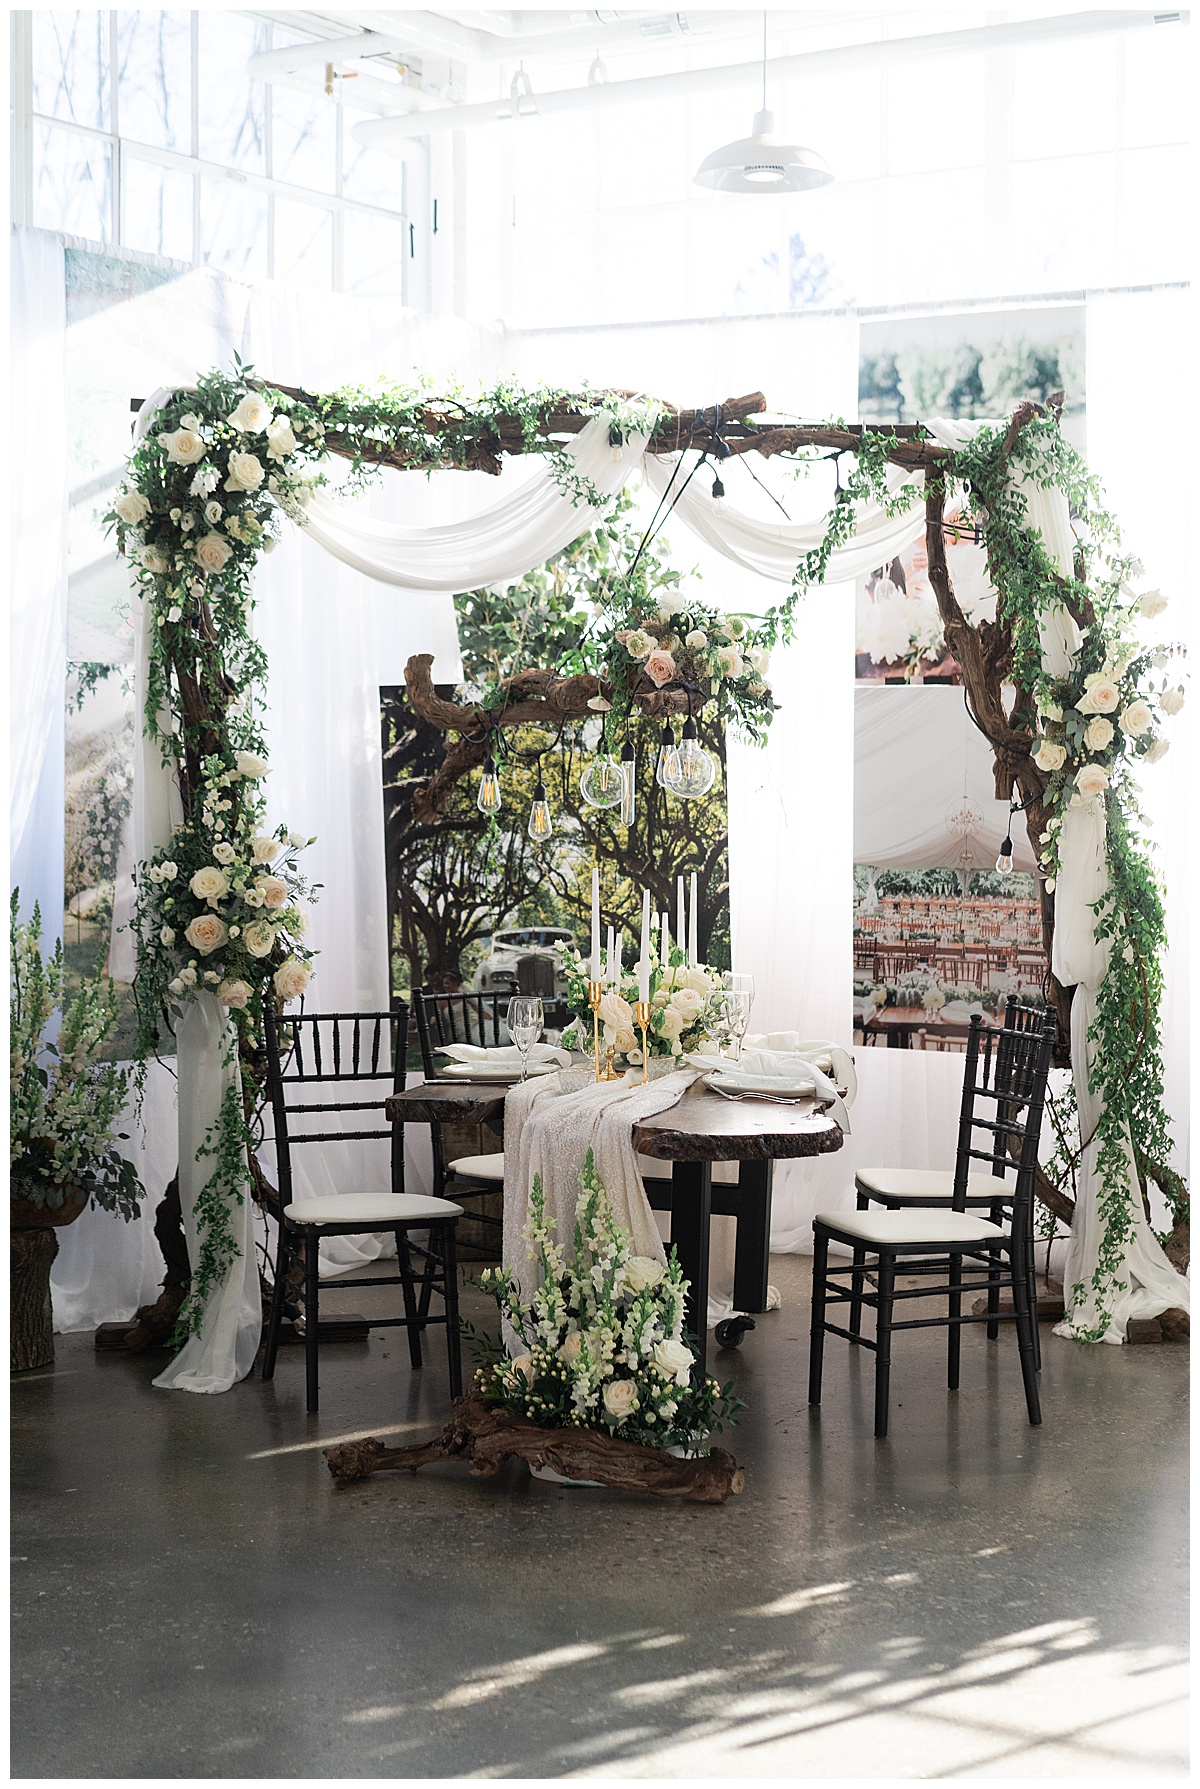 Floral installations by Houston’s Best Wedding Photographers